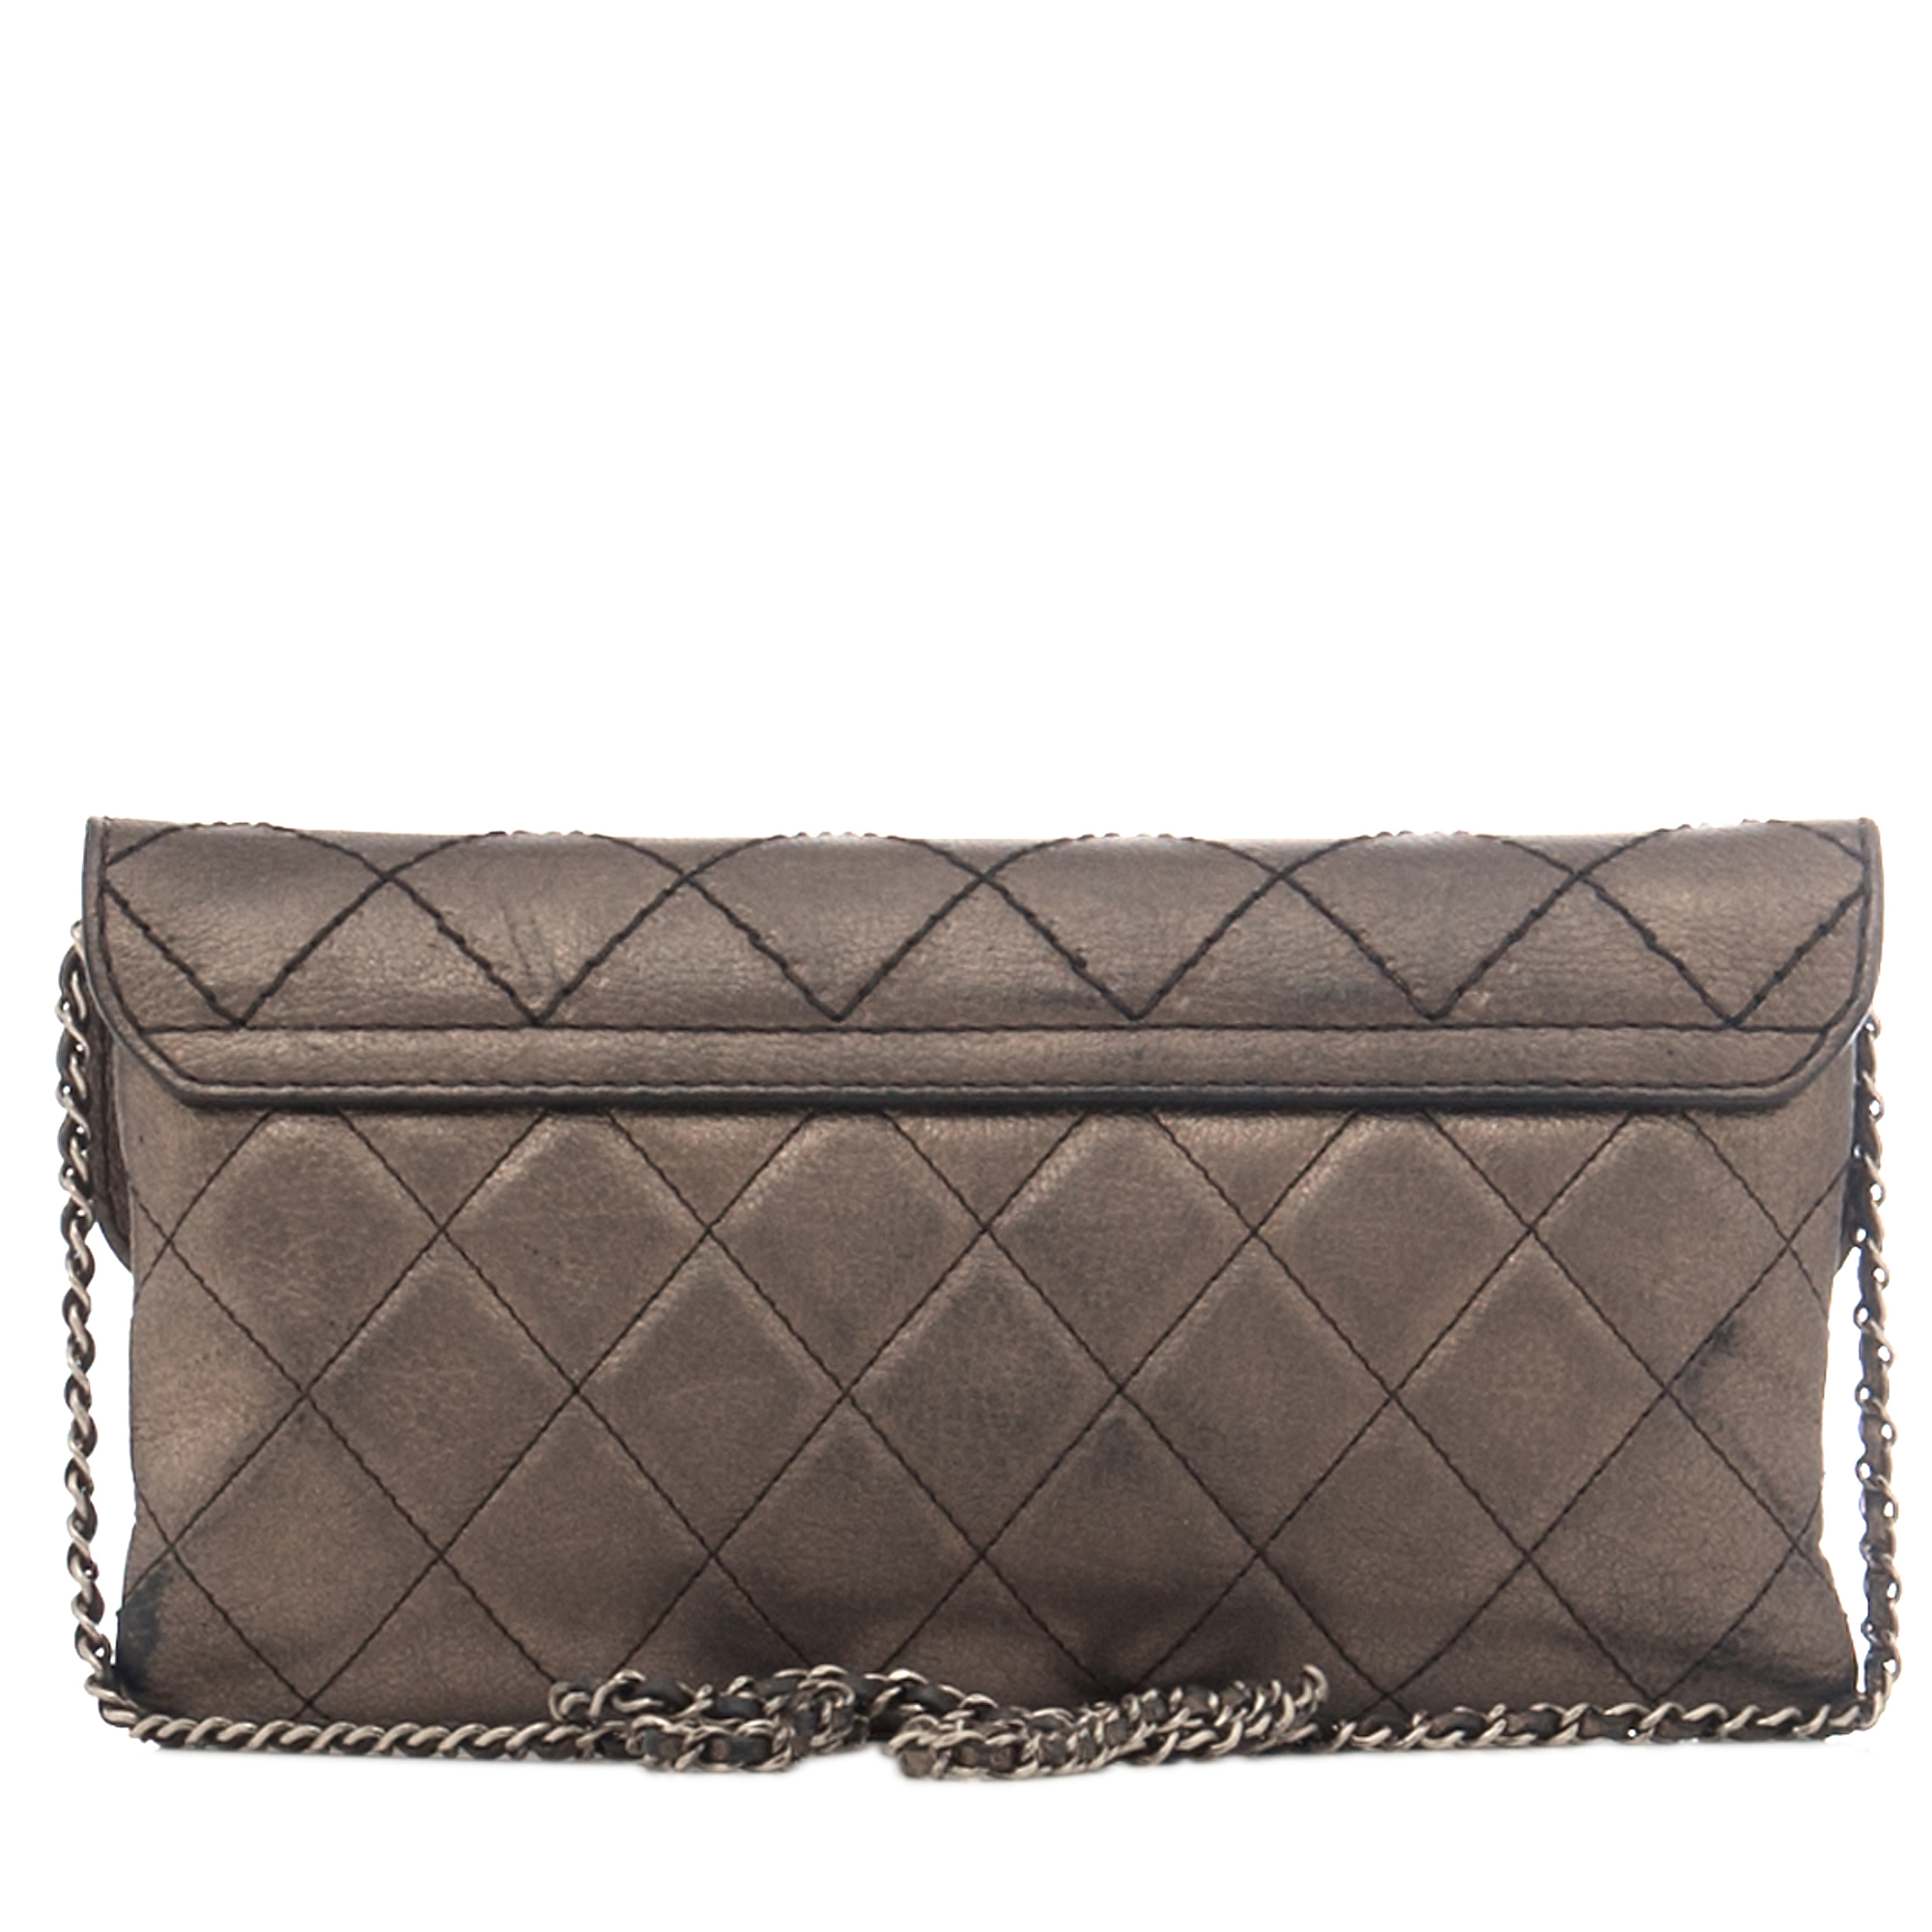 Chanel Bronze Metallic Quilted Leather Flap Bag - Chanel